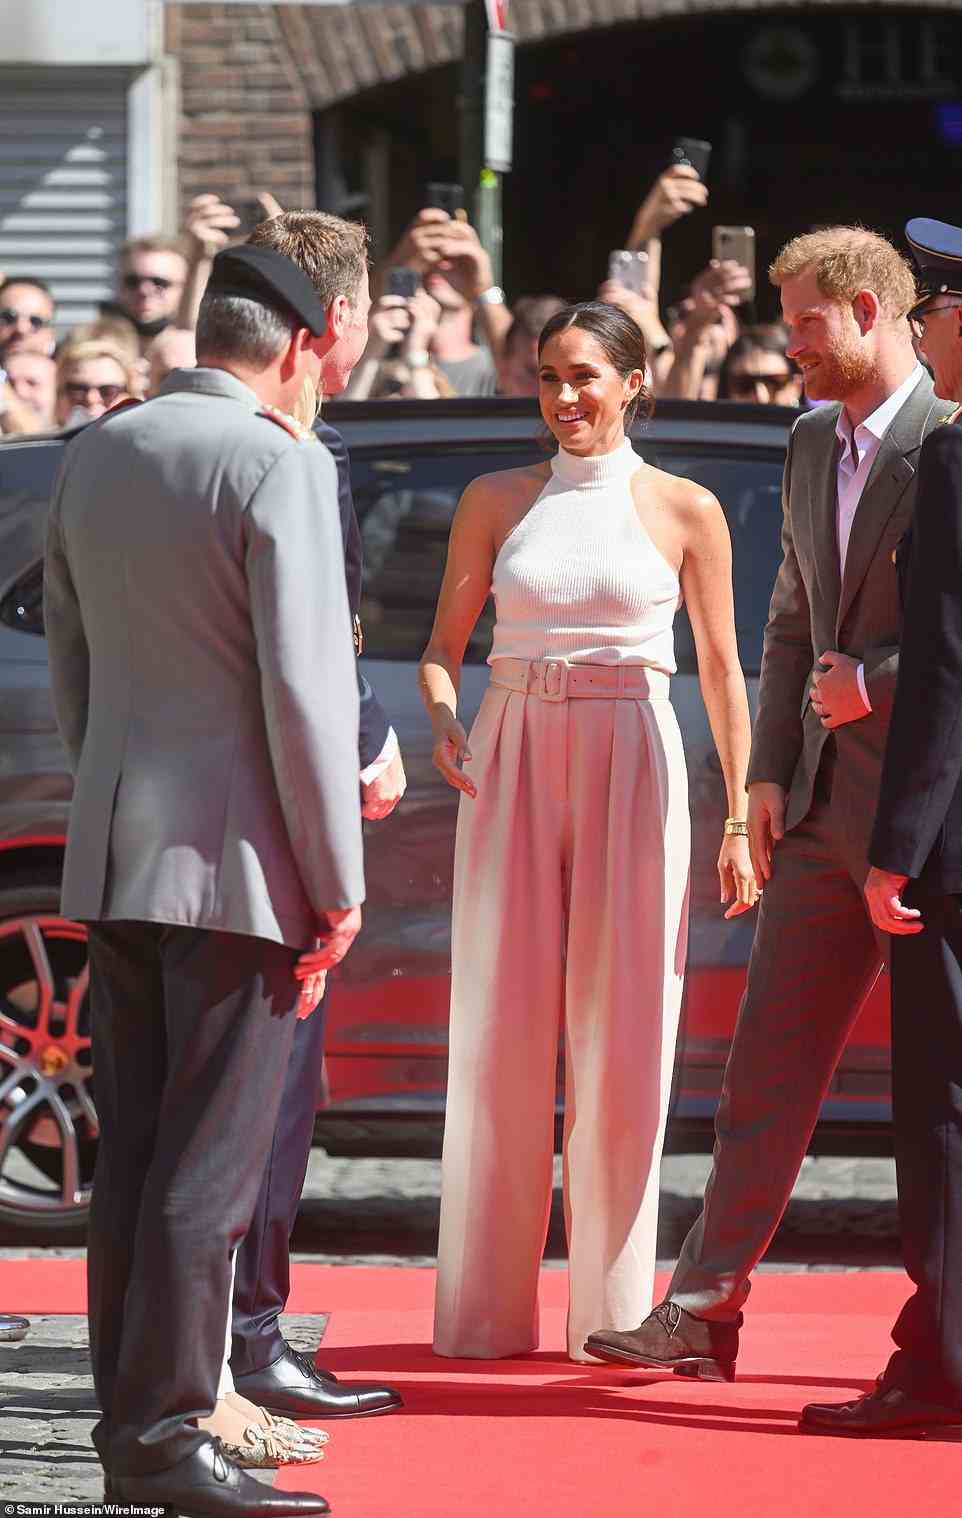 The Duchess of Sussex appeared to share a joke with the officials of the Invictus Games as she was pictured laughing with them on her arrival in Dusseldorf